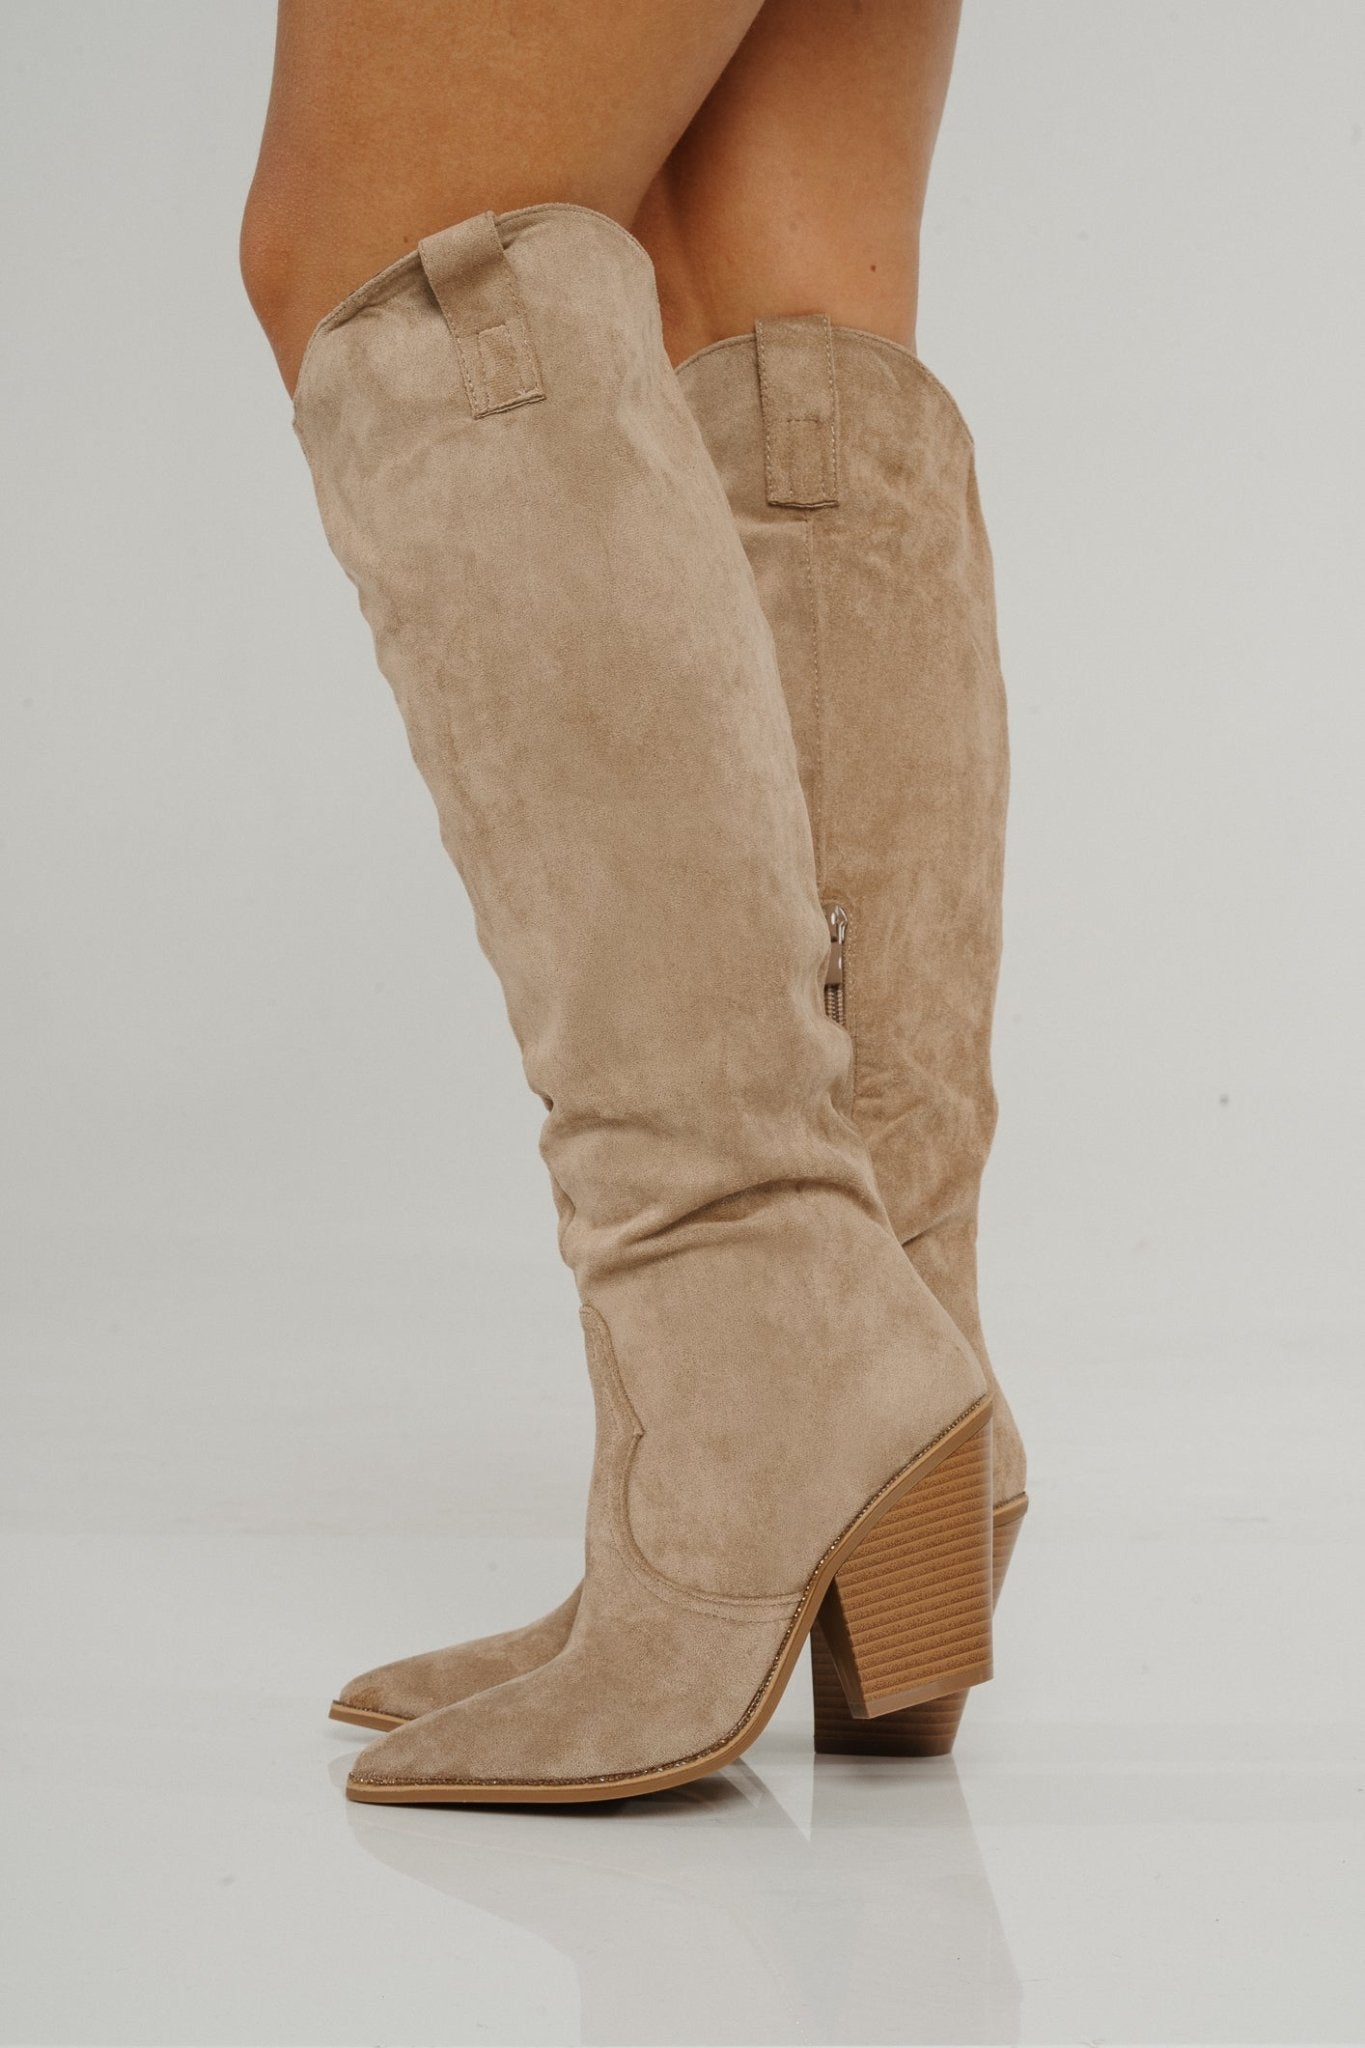 Gucci Vintage Suede Western Boots - Neutrals Boots, Shoes